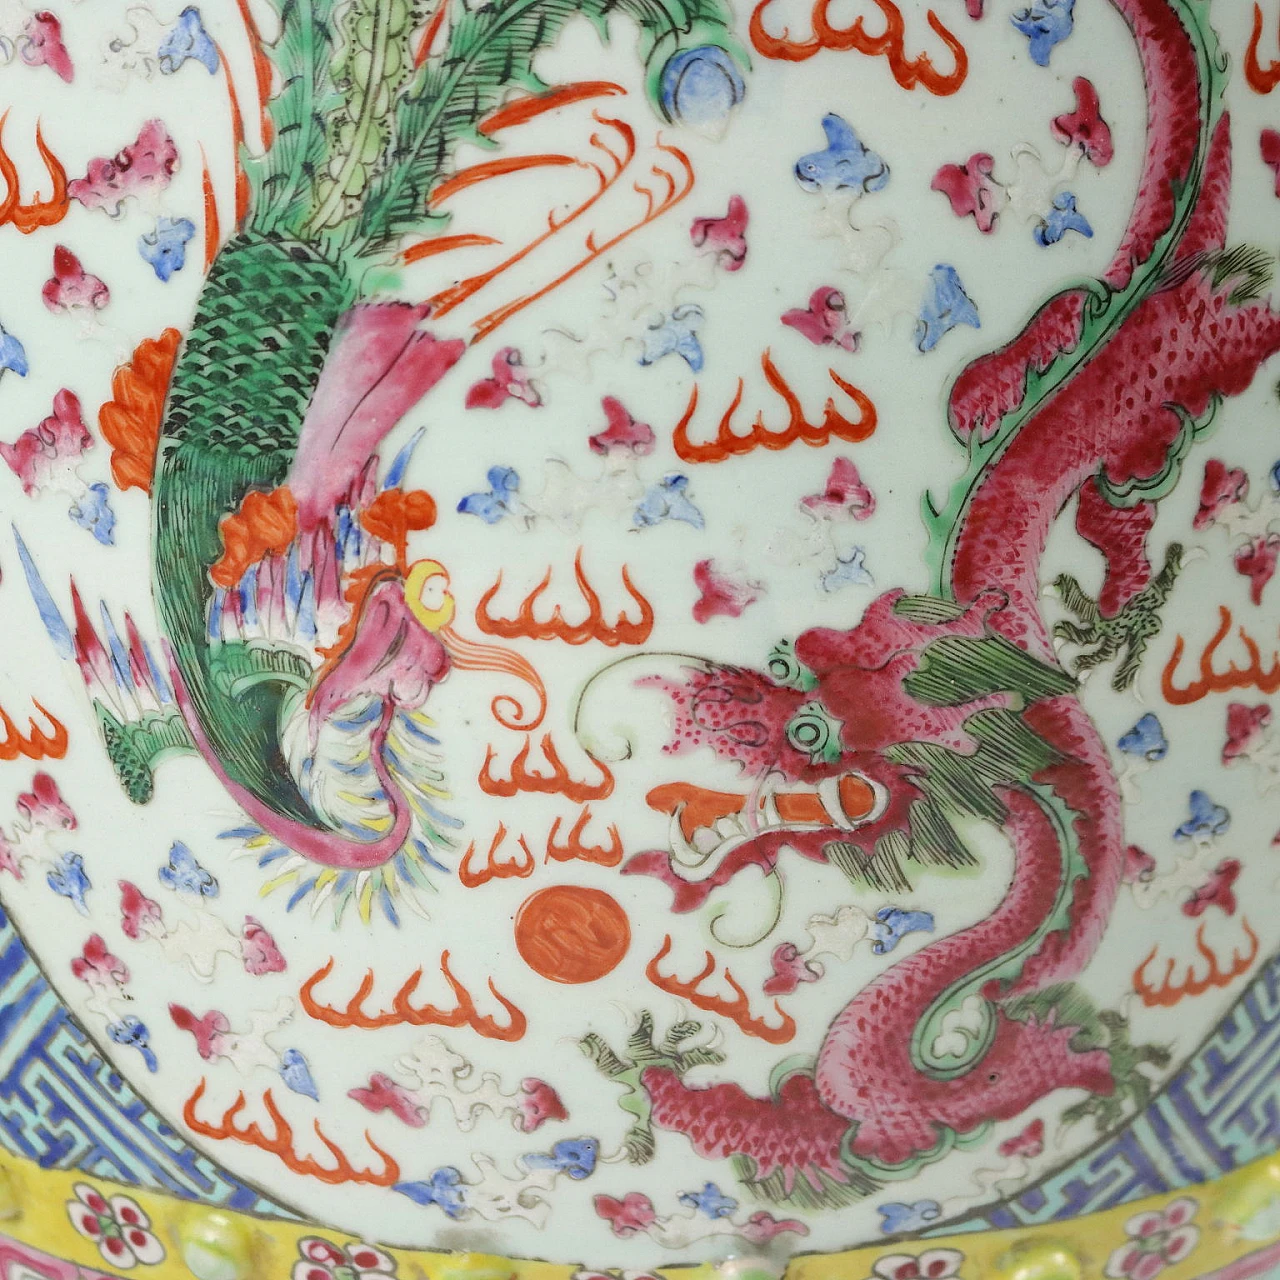 Porcelain stool decorated with dragon and phoenix, 19th century 3